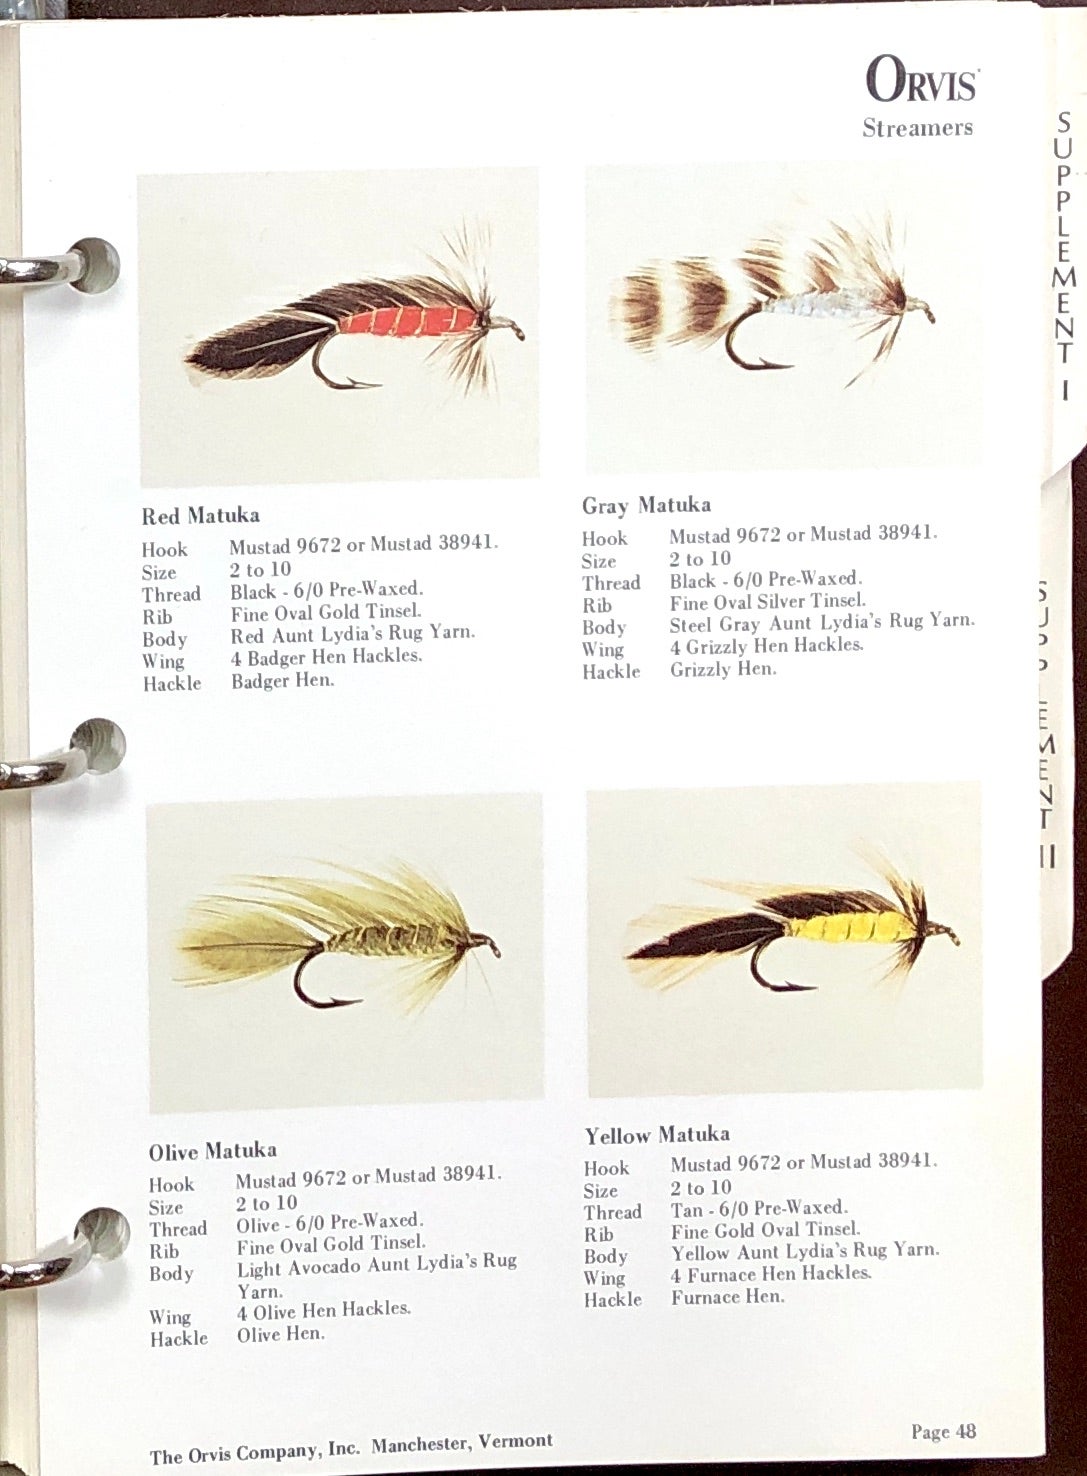 Index of Orvis Fly Patterns, John Harder